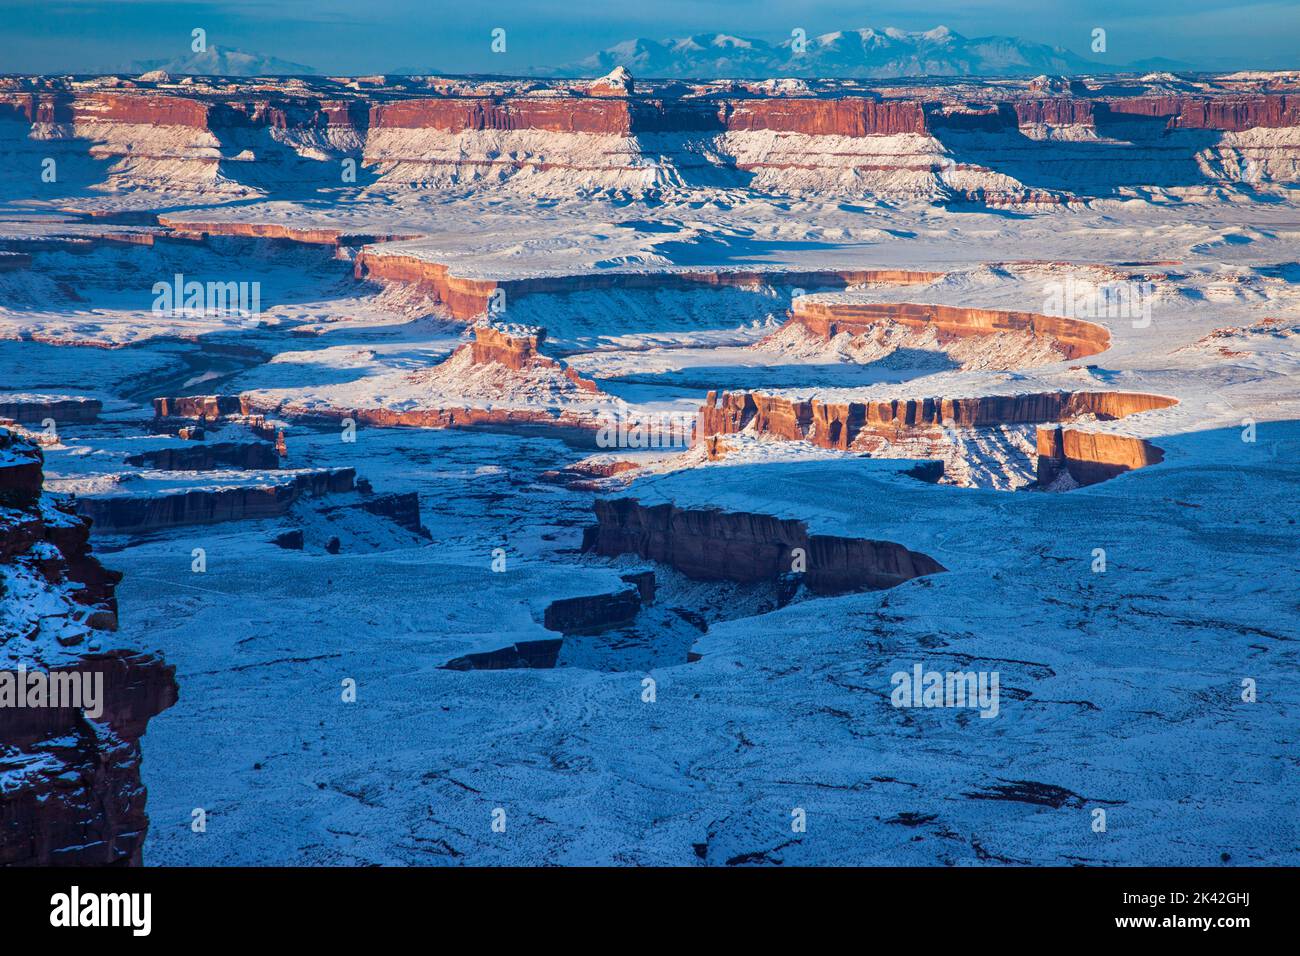 Winter view from Candlestick Tower Overlook in Canyonlands National Park, Utah.  Green River Basin and Turk's Head in front with the Orange Cliffs / G Stock Photo